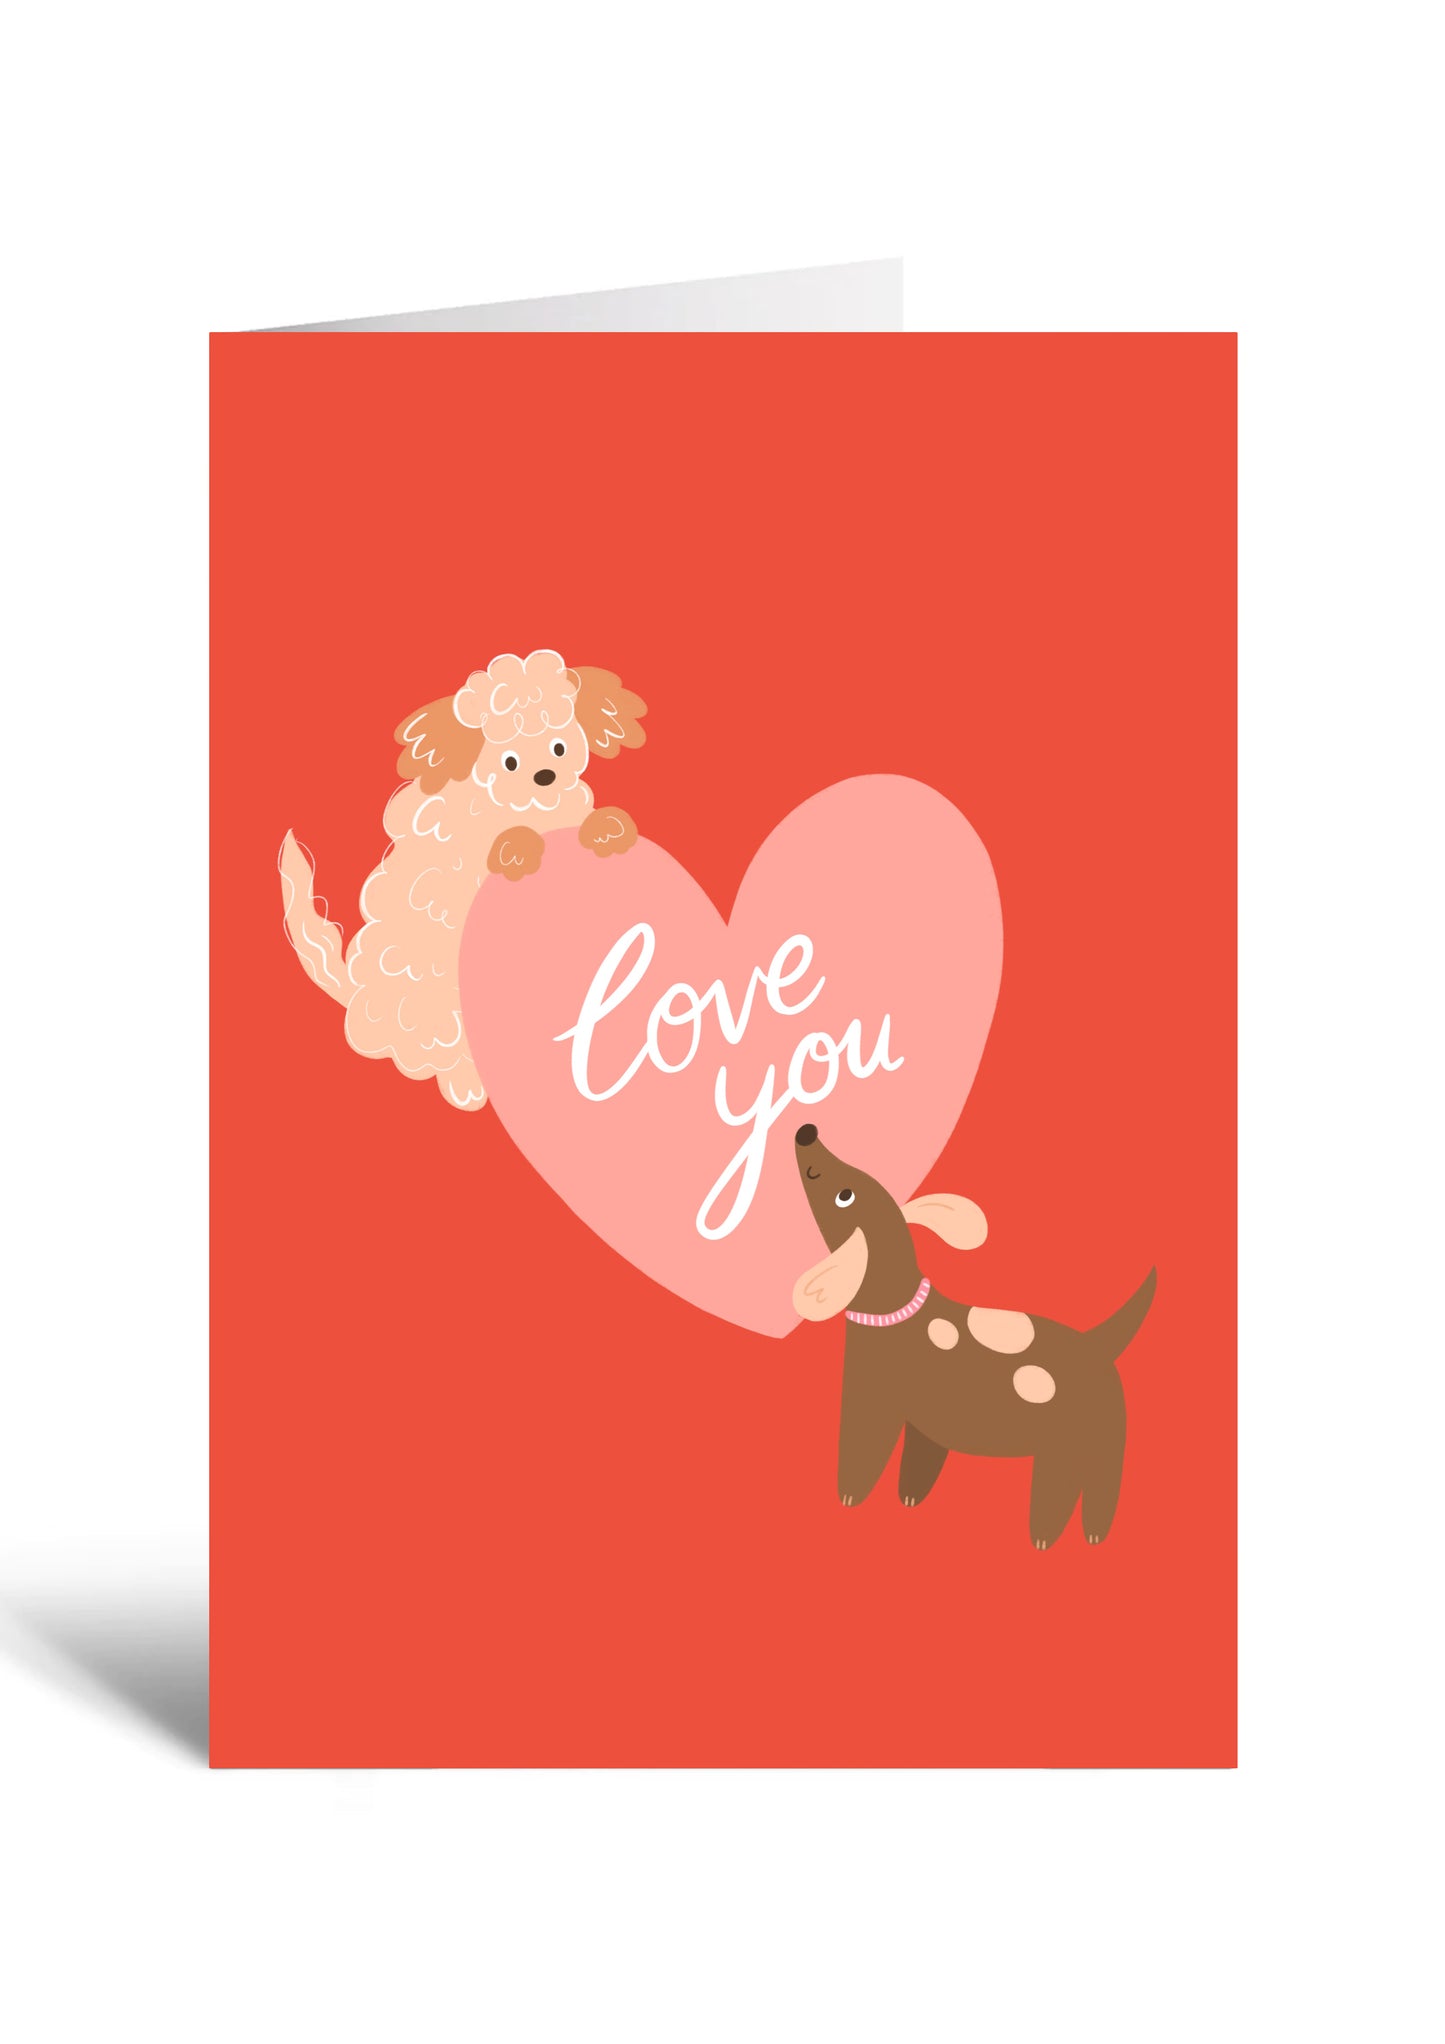 Bright red card featuring playful dogs.